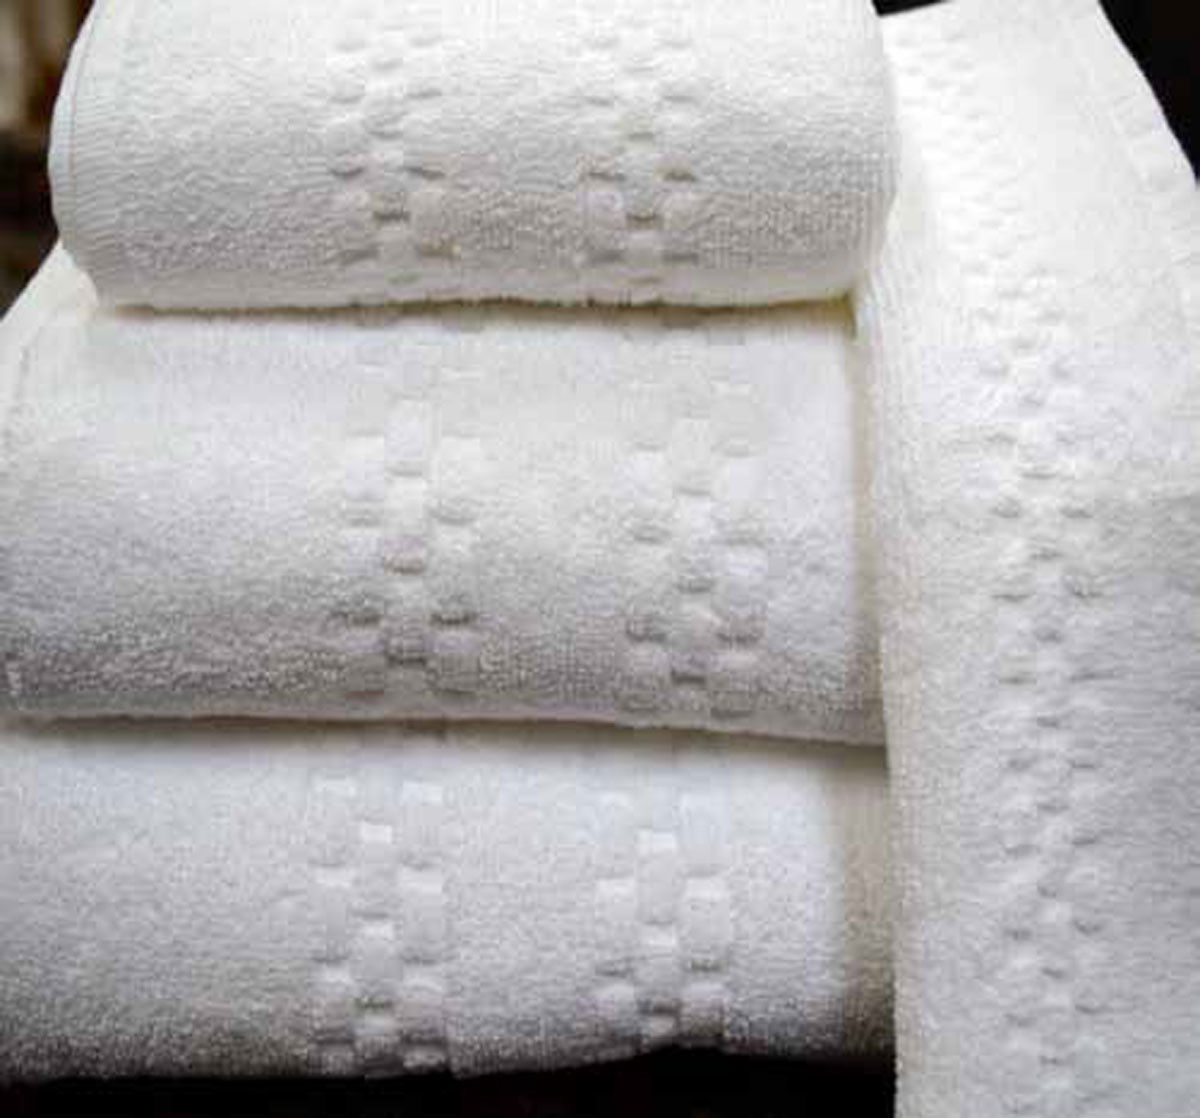 What kind of towels do hotels use?